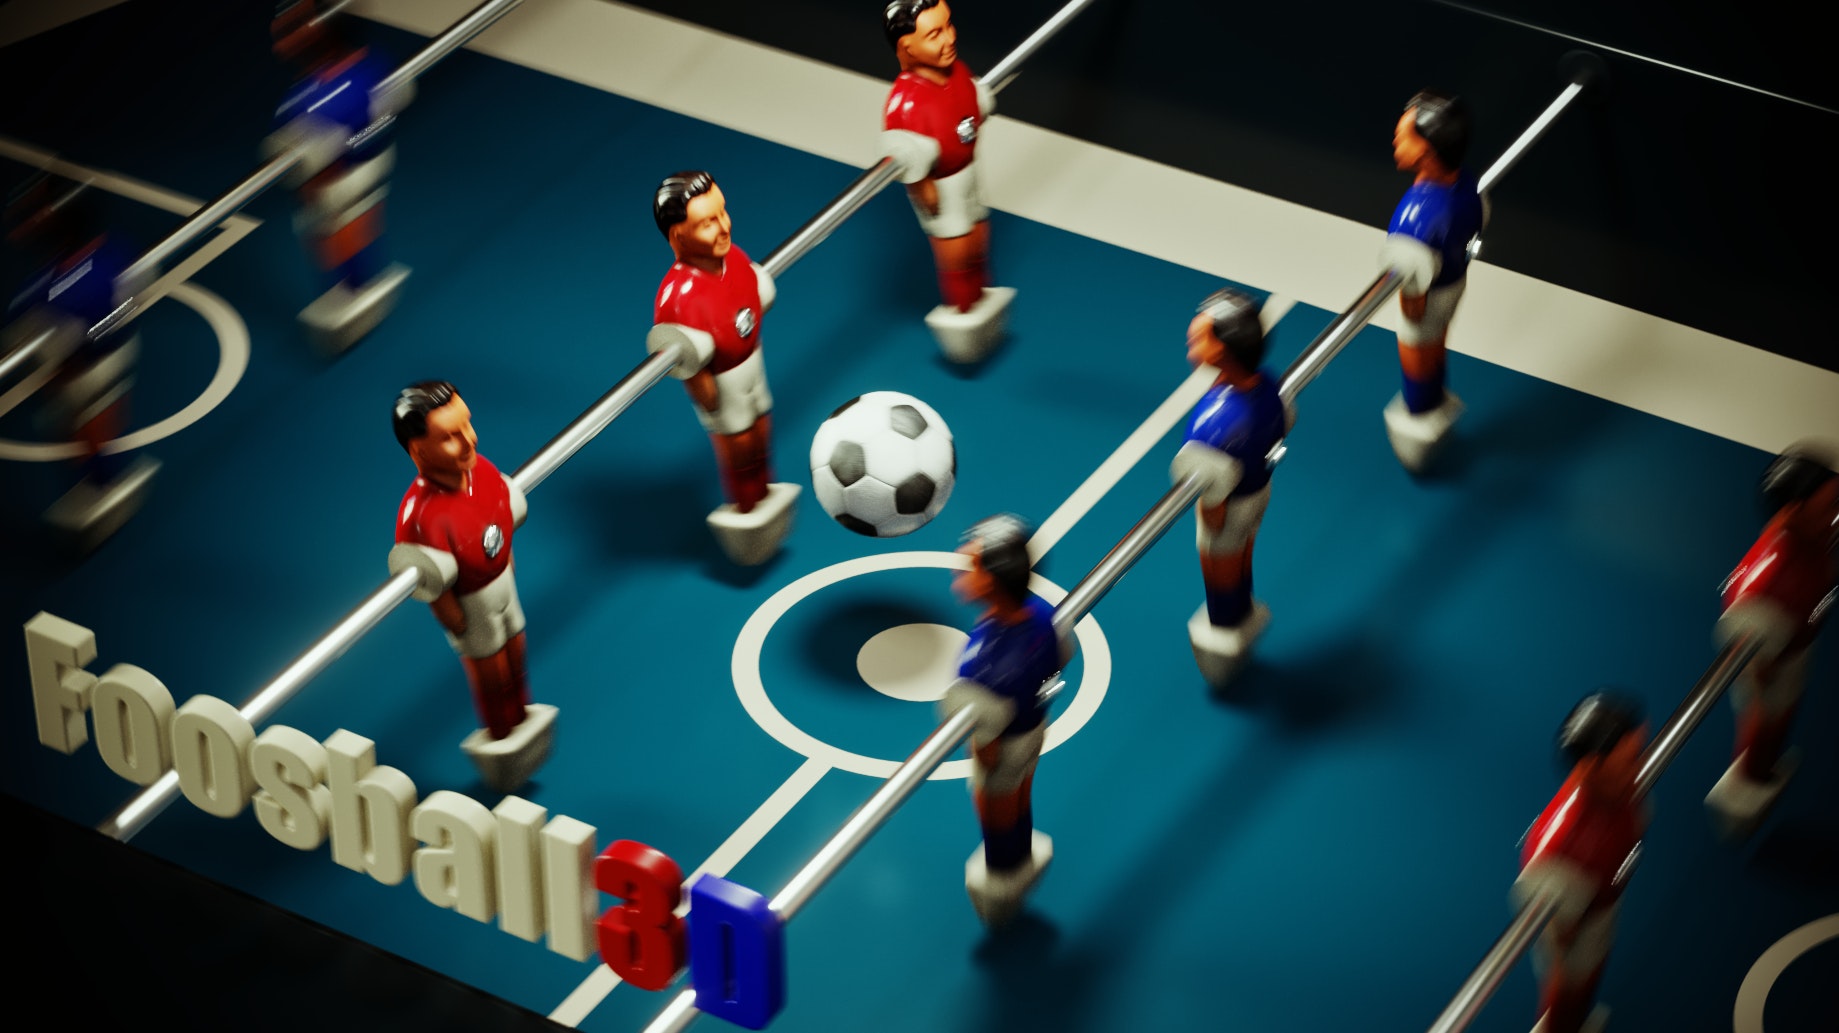 SWING SOCCER free online game on